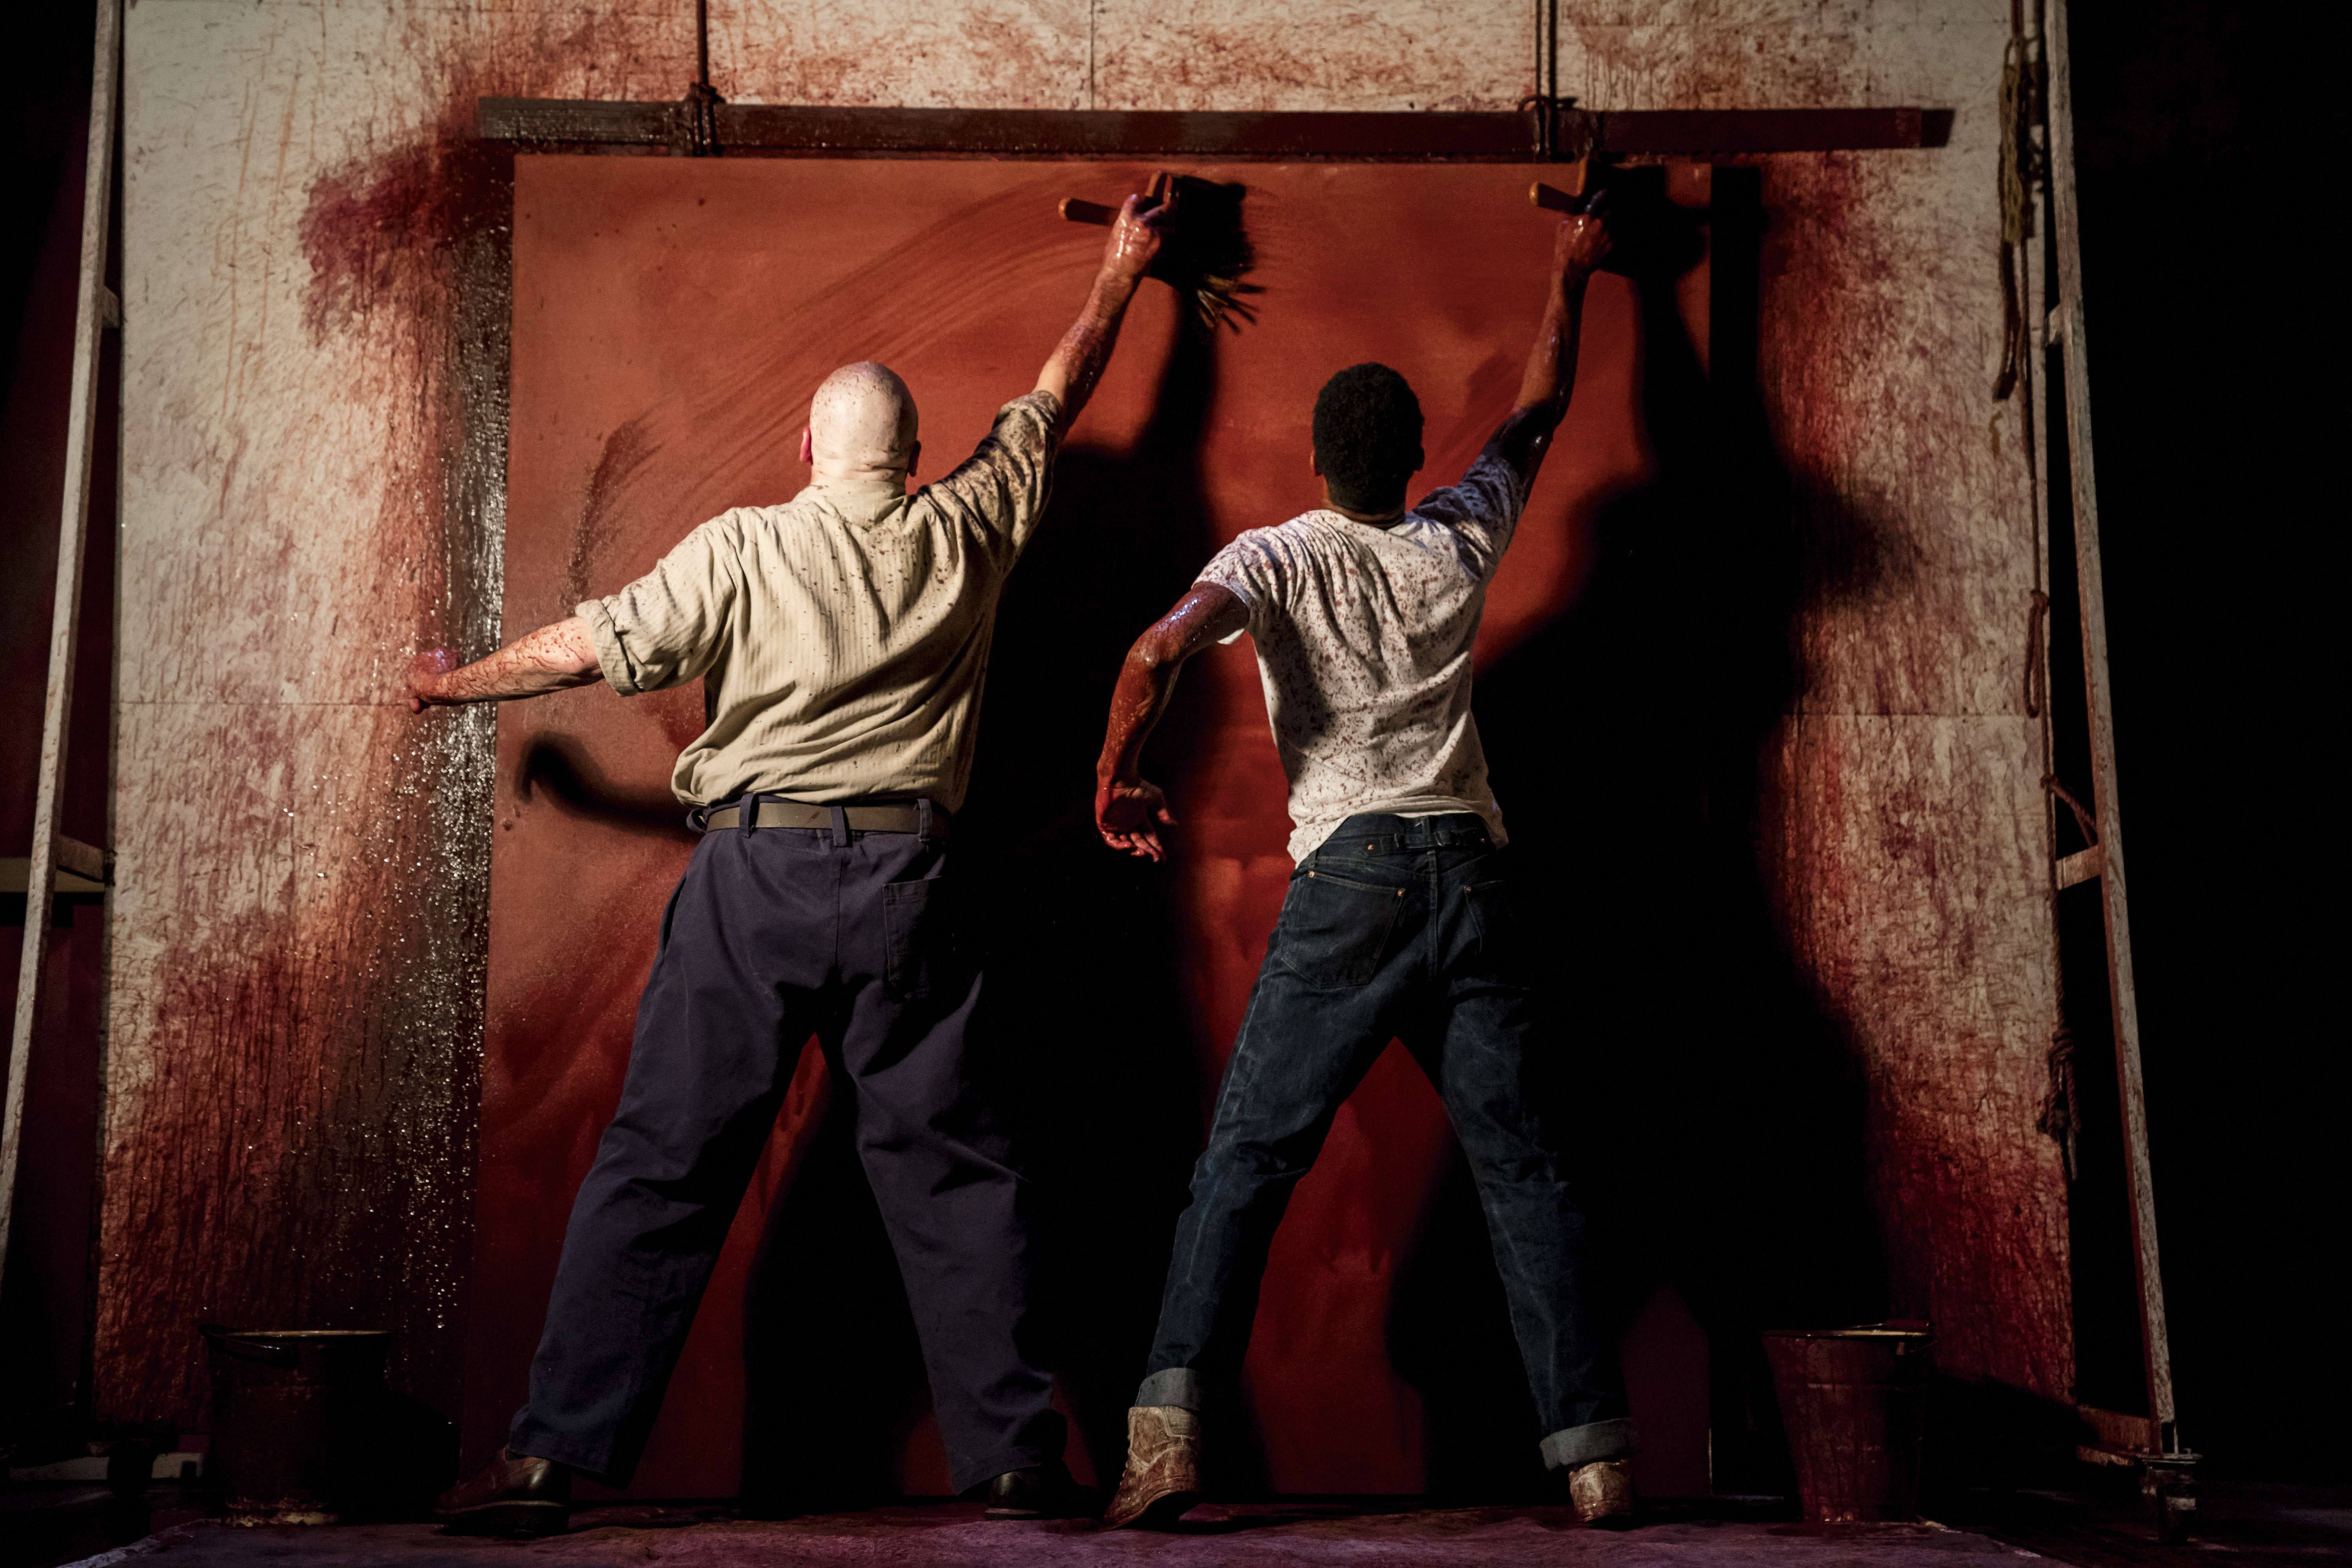 RED, Wyndhams Theatre - Alfred Molina (Mark Rothko), Alfred Enoch (Ken). photo by Johan Persson